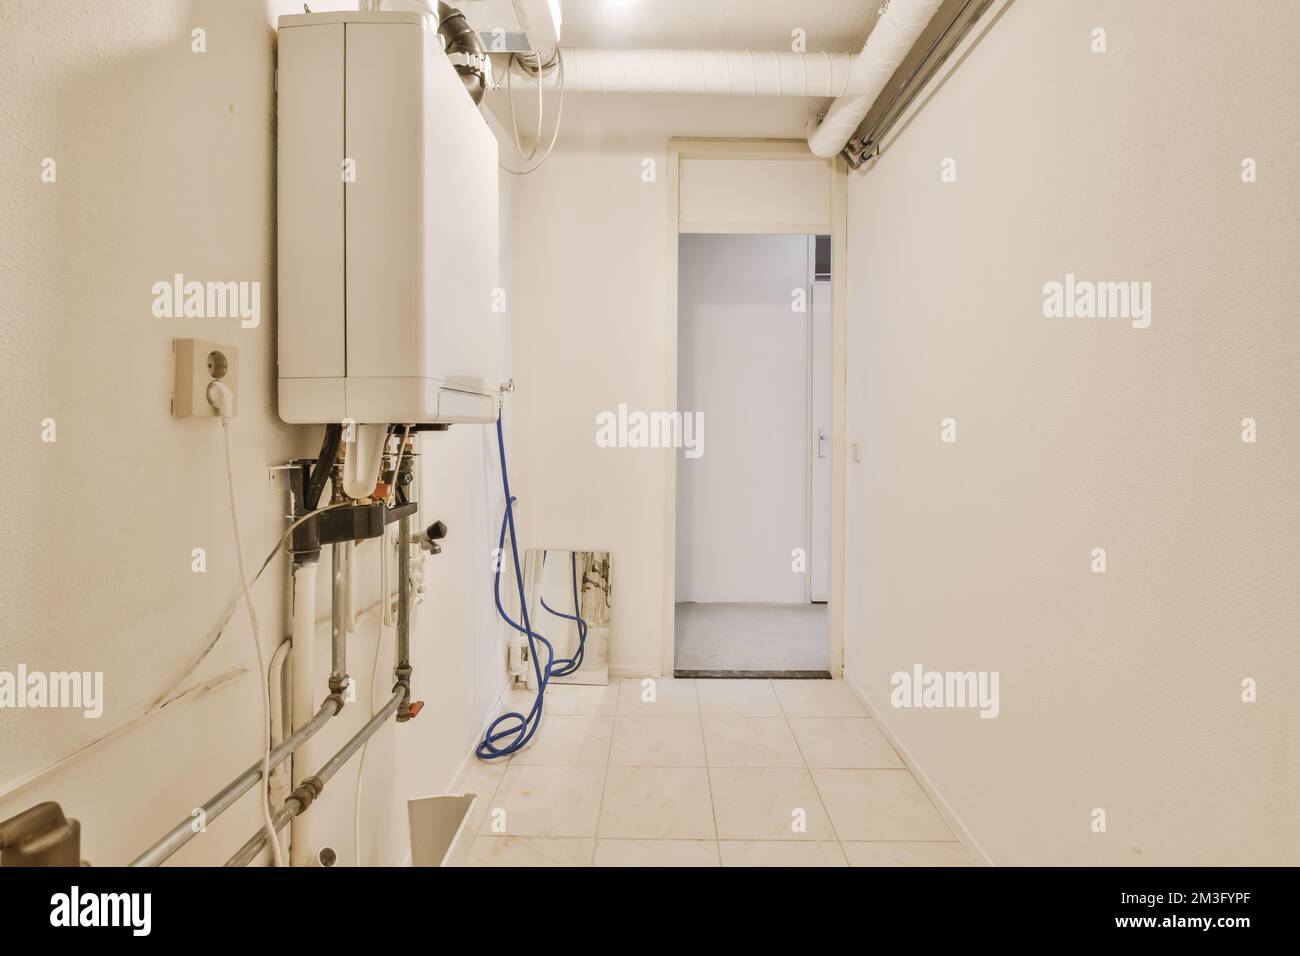 a very clean white room with some pipes and water heaters on the wall in this photo is taken from inside Stock Photo